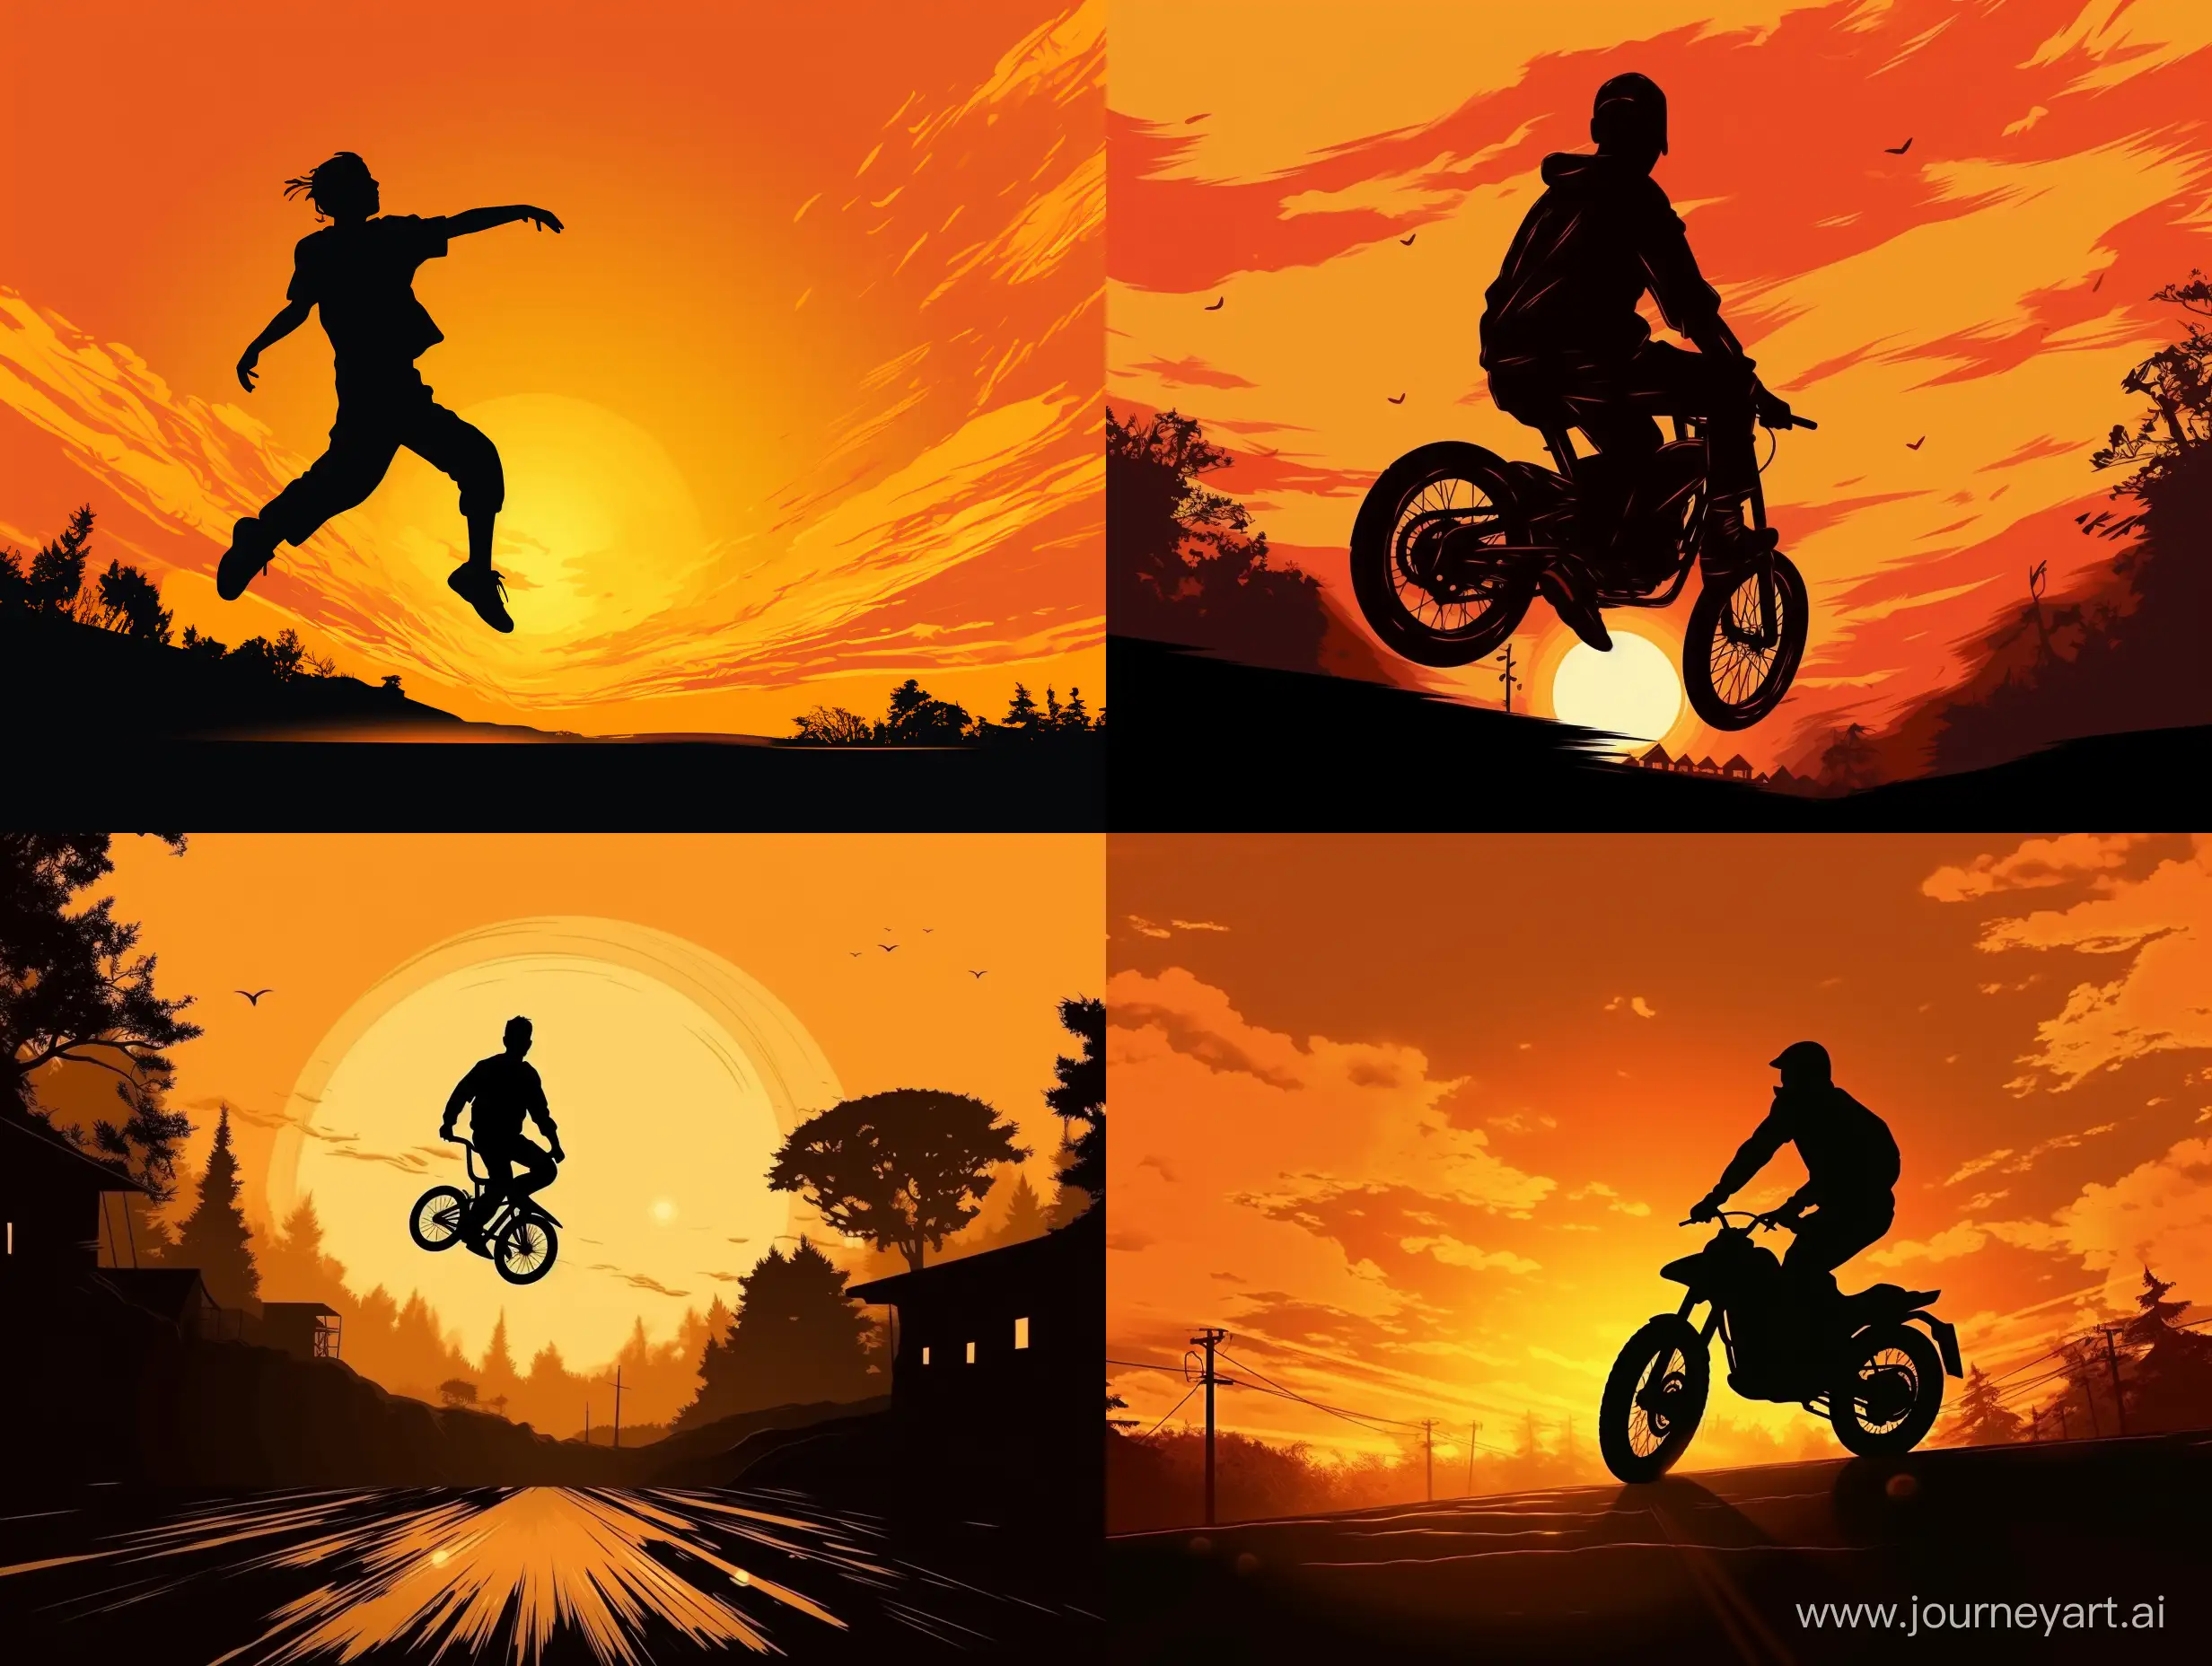 The silhouette of an athlete, a jump, a scooter, a golden sunset sky